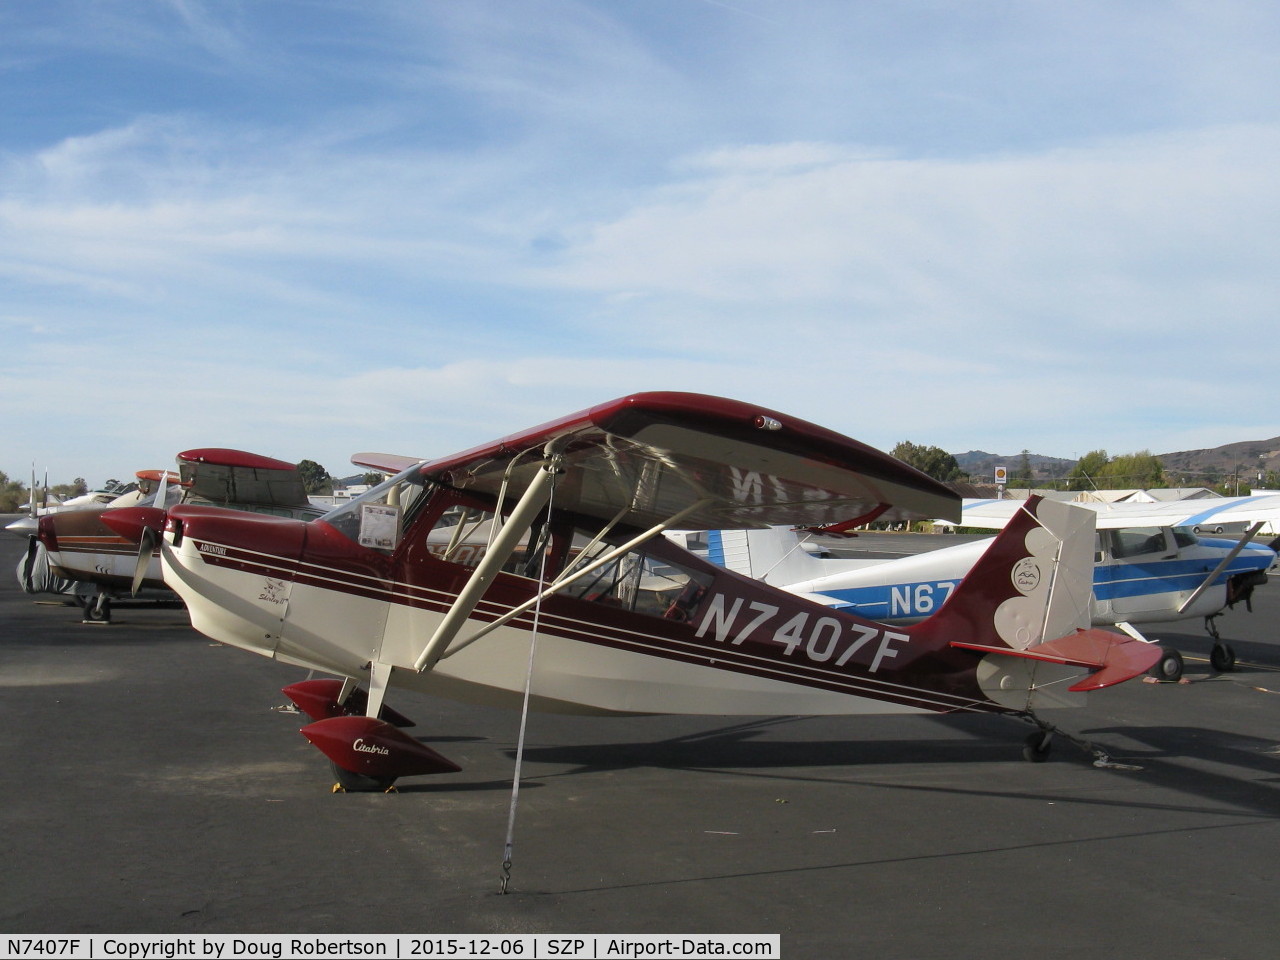 N7407F, 1999 American Champion 7GCAA Adventure Citabria C/N 416-98, 1999 American Champion 7GCAA ADVENTURE, Lycoming O-320-B2B 160 Hp, very attractive low time as new- appearing aircraft prize winner is FOR SALE